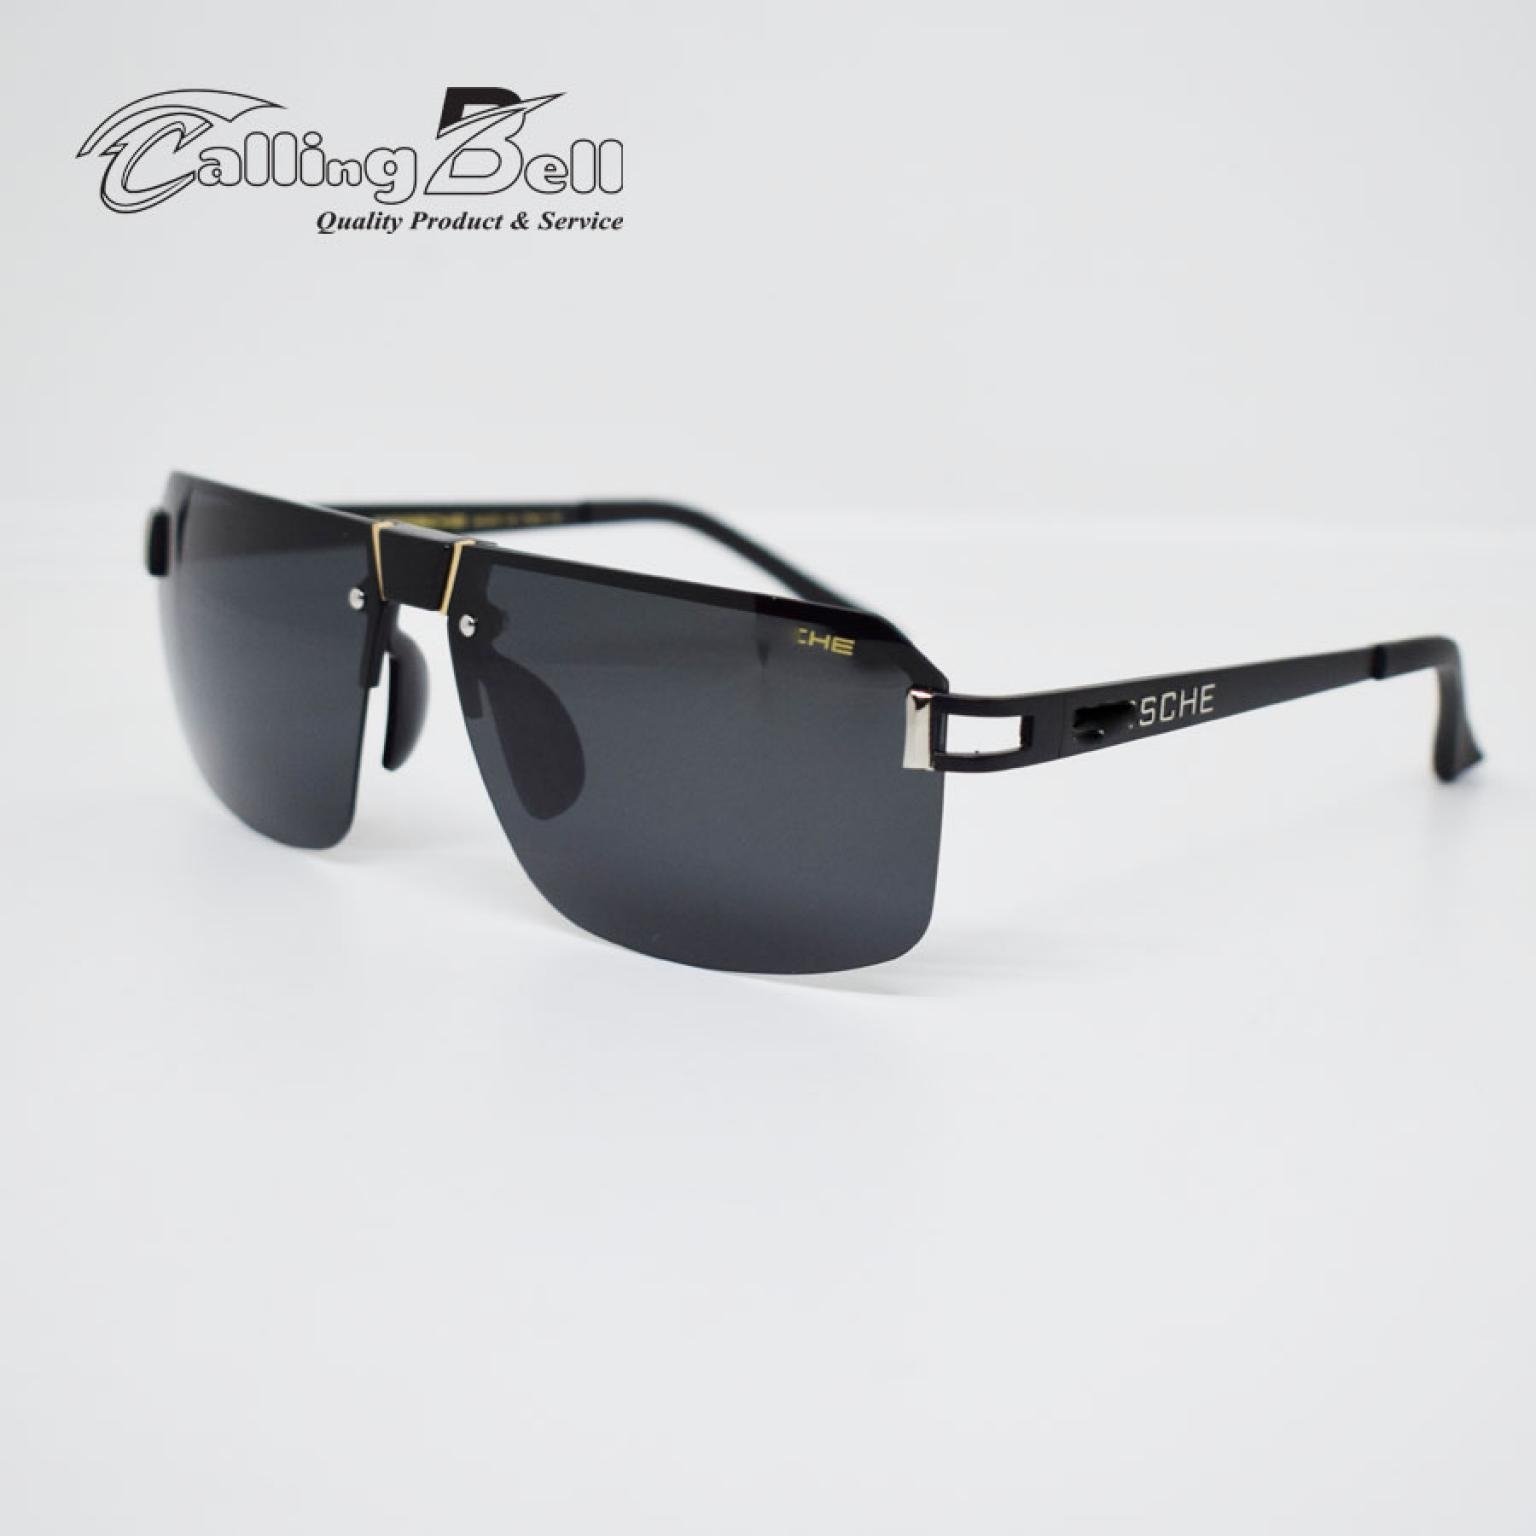 Classic design Polarized unisex sunglass UV400 protected For driving Men women black with golden touch